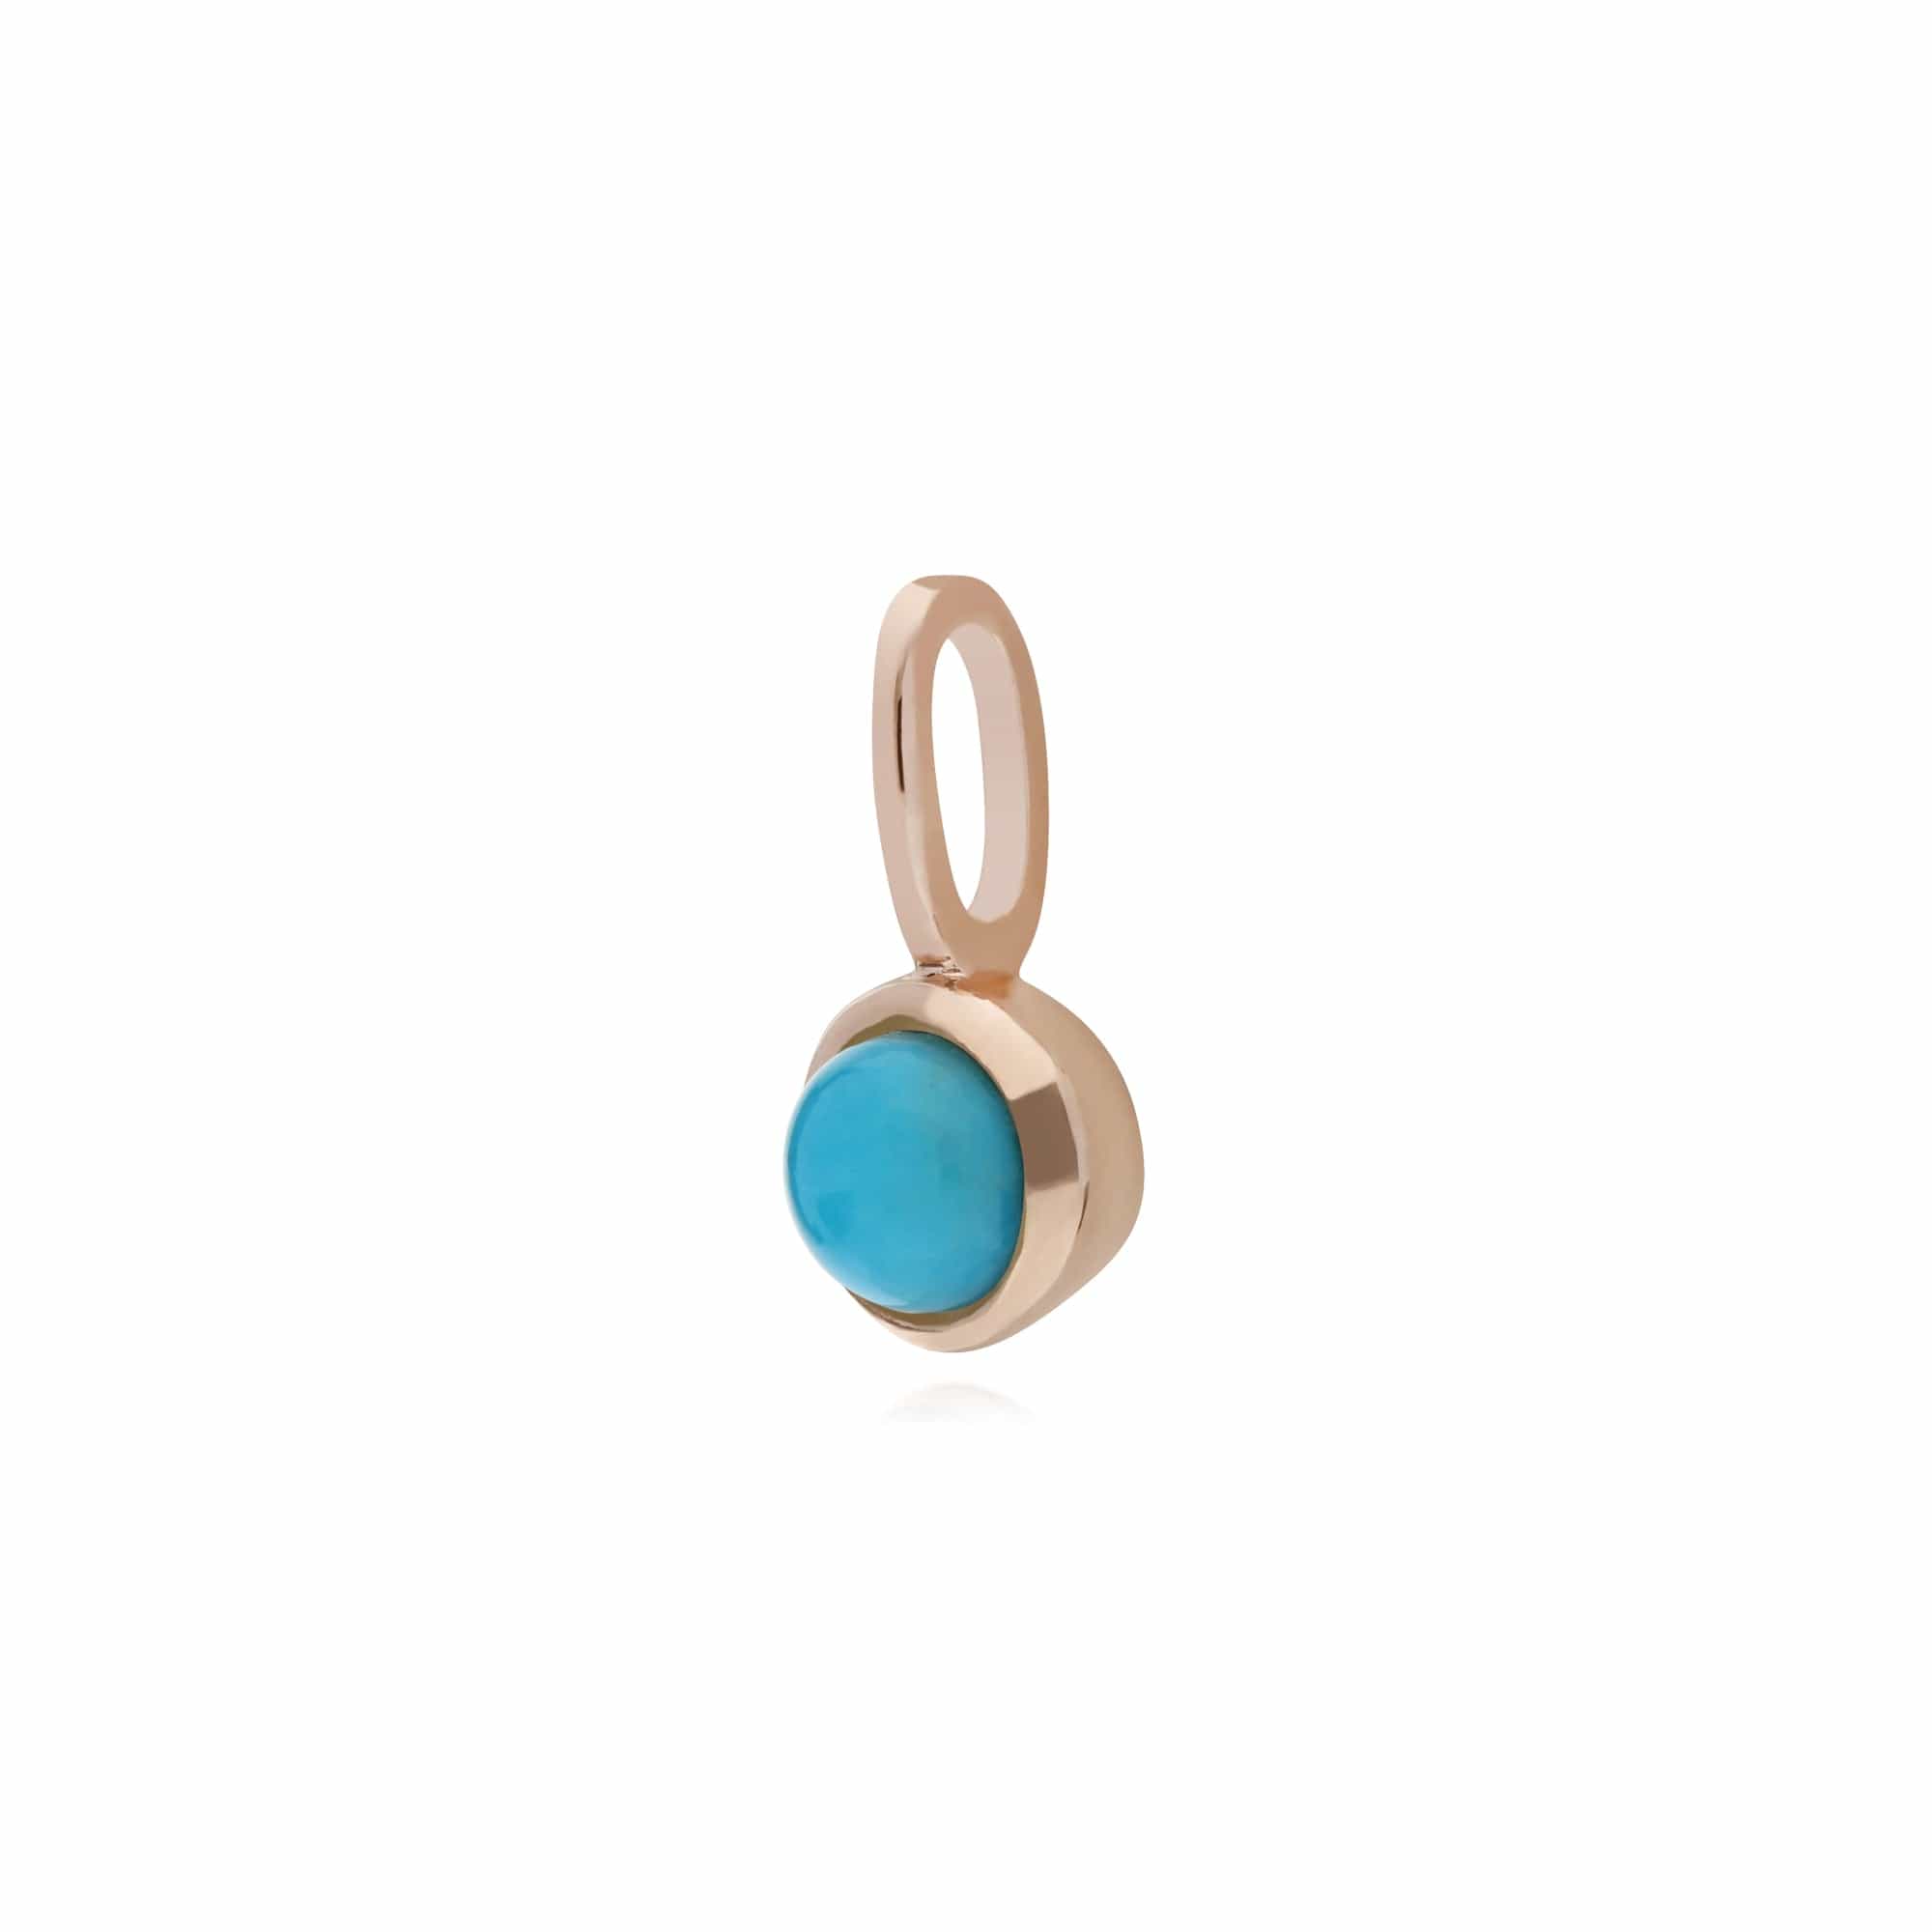 Gemondo Rose Gold Plated Sterling Silver Turquoise Charm - Gemondo